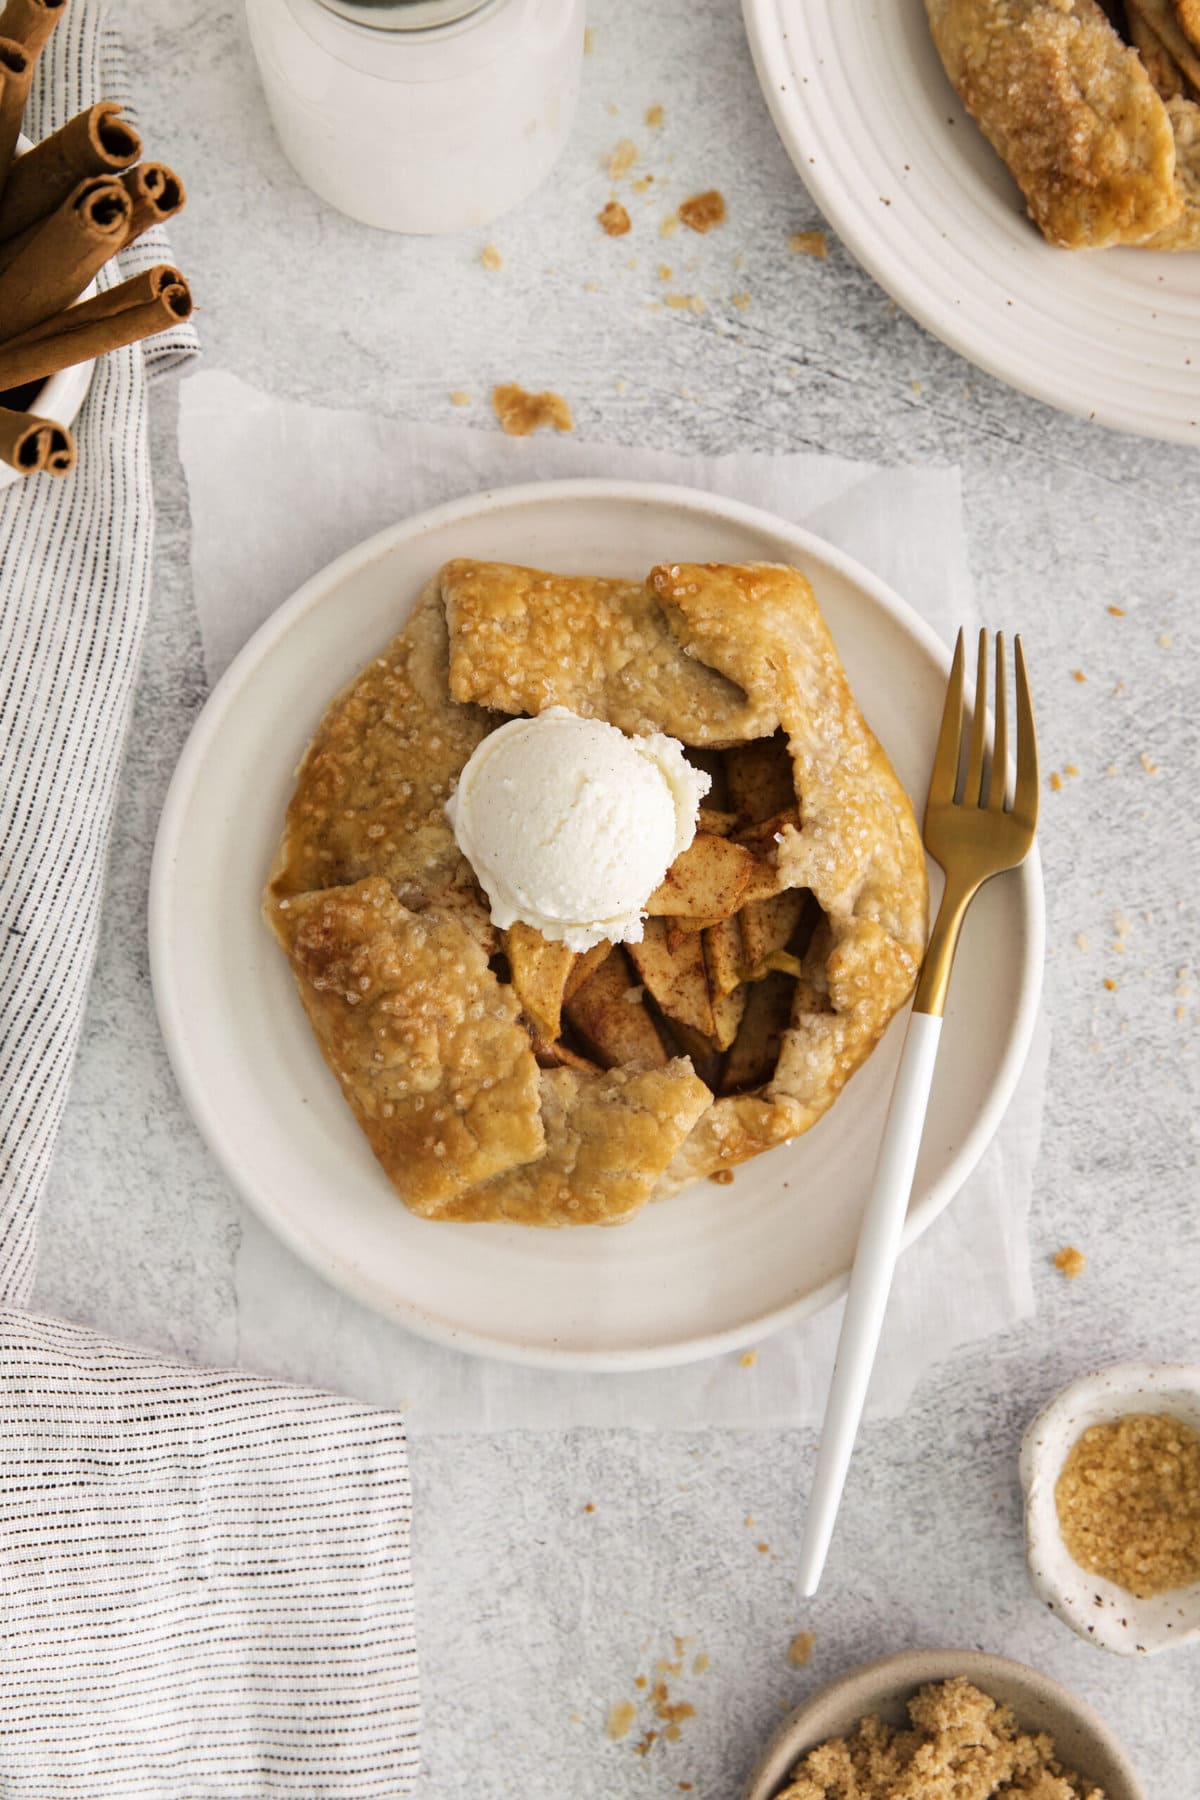 picture of apple galette on a table with a scoop of ice cream and a fork on the plate